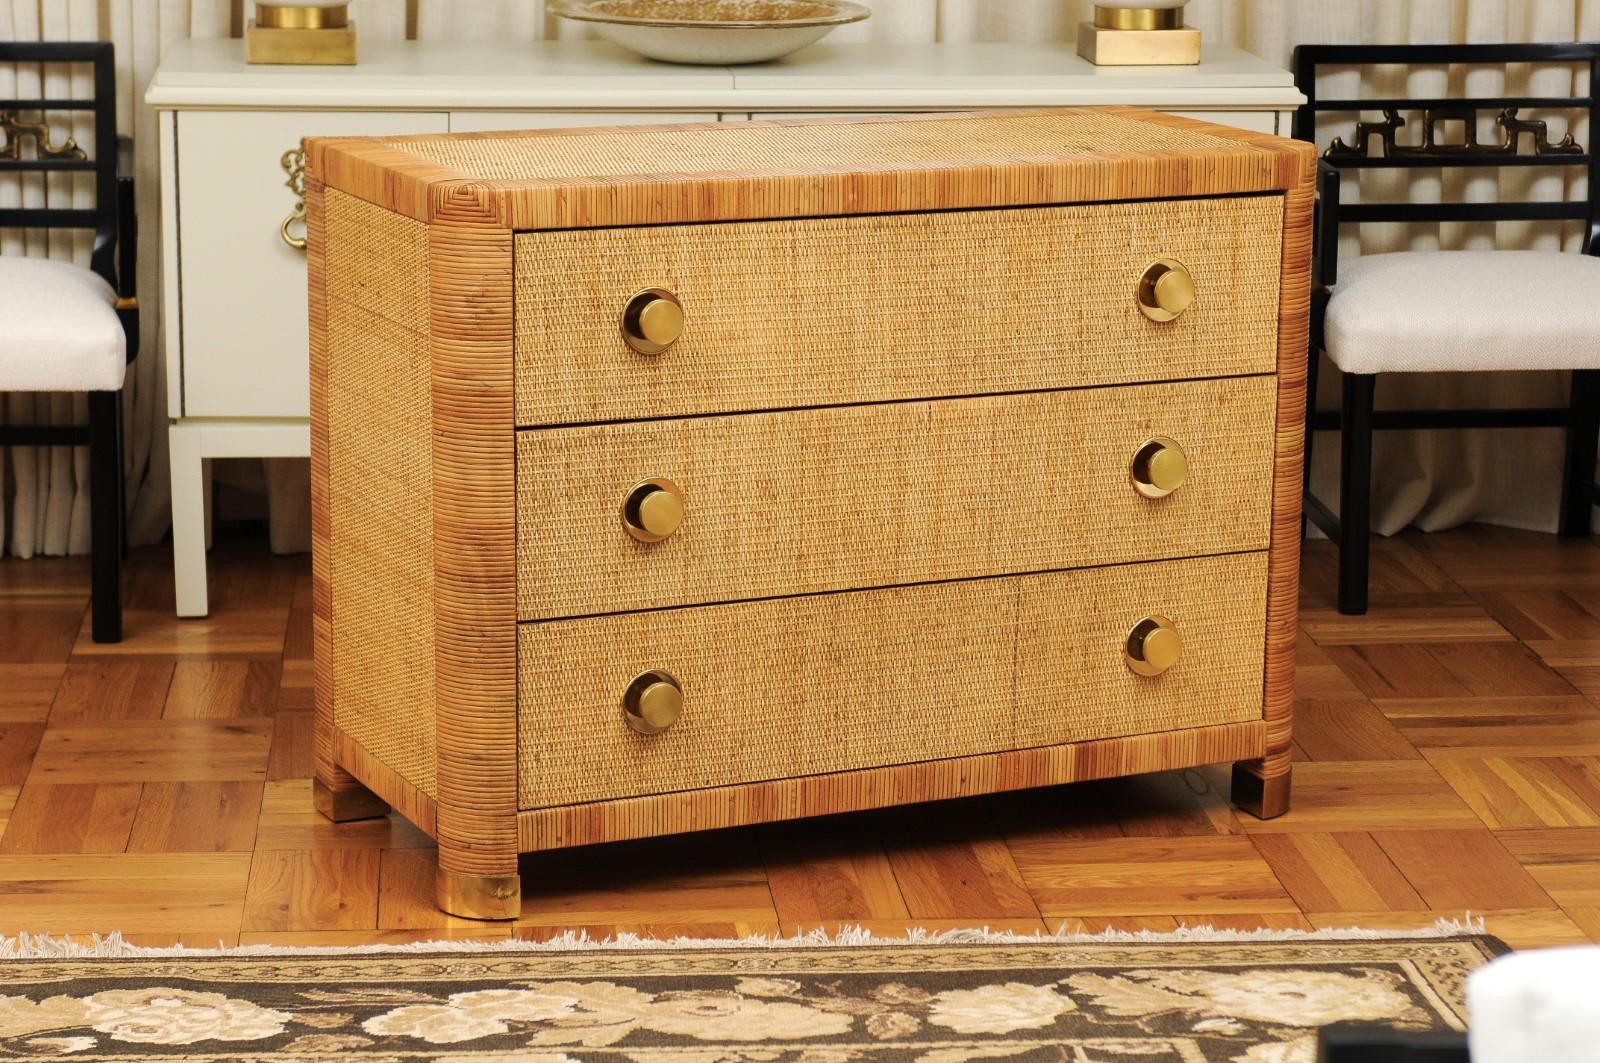 
This magnificent chest is shipped as professionally photographed and described in the listing narrative: Meticulously professionally restored and completely installation ready. There are a pair of these unusual chest available.

An elegant commode